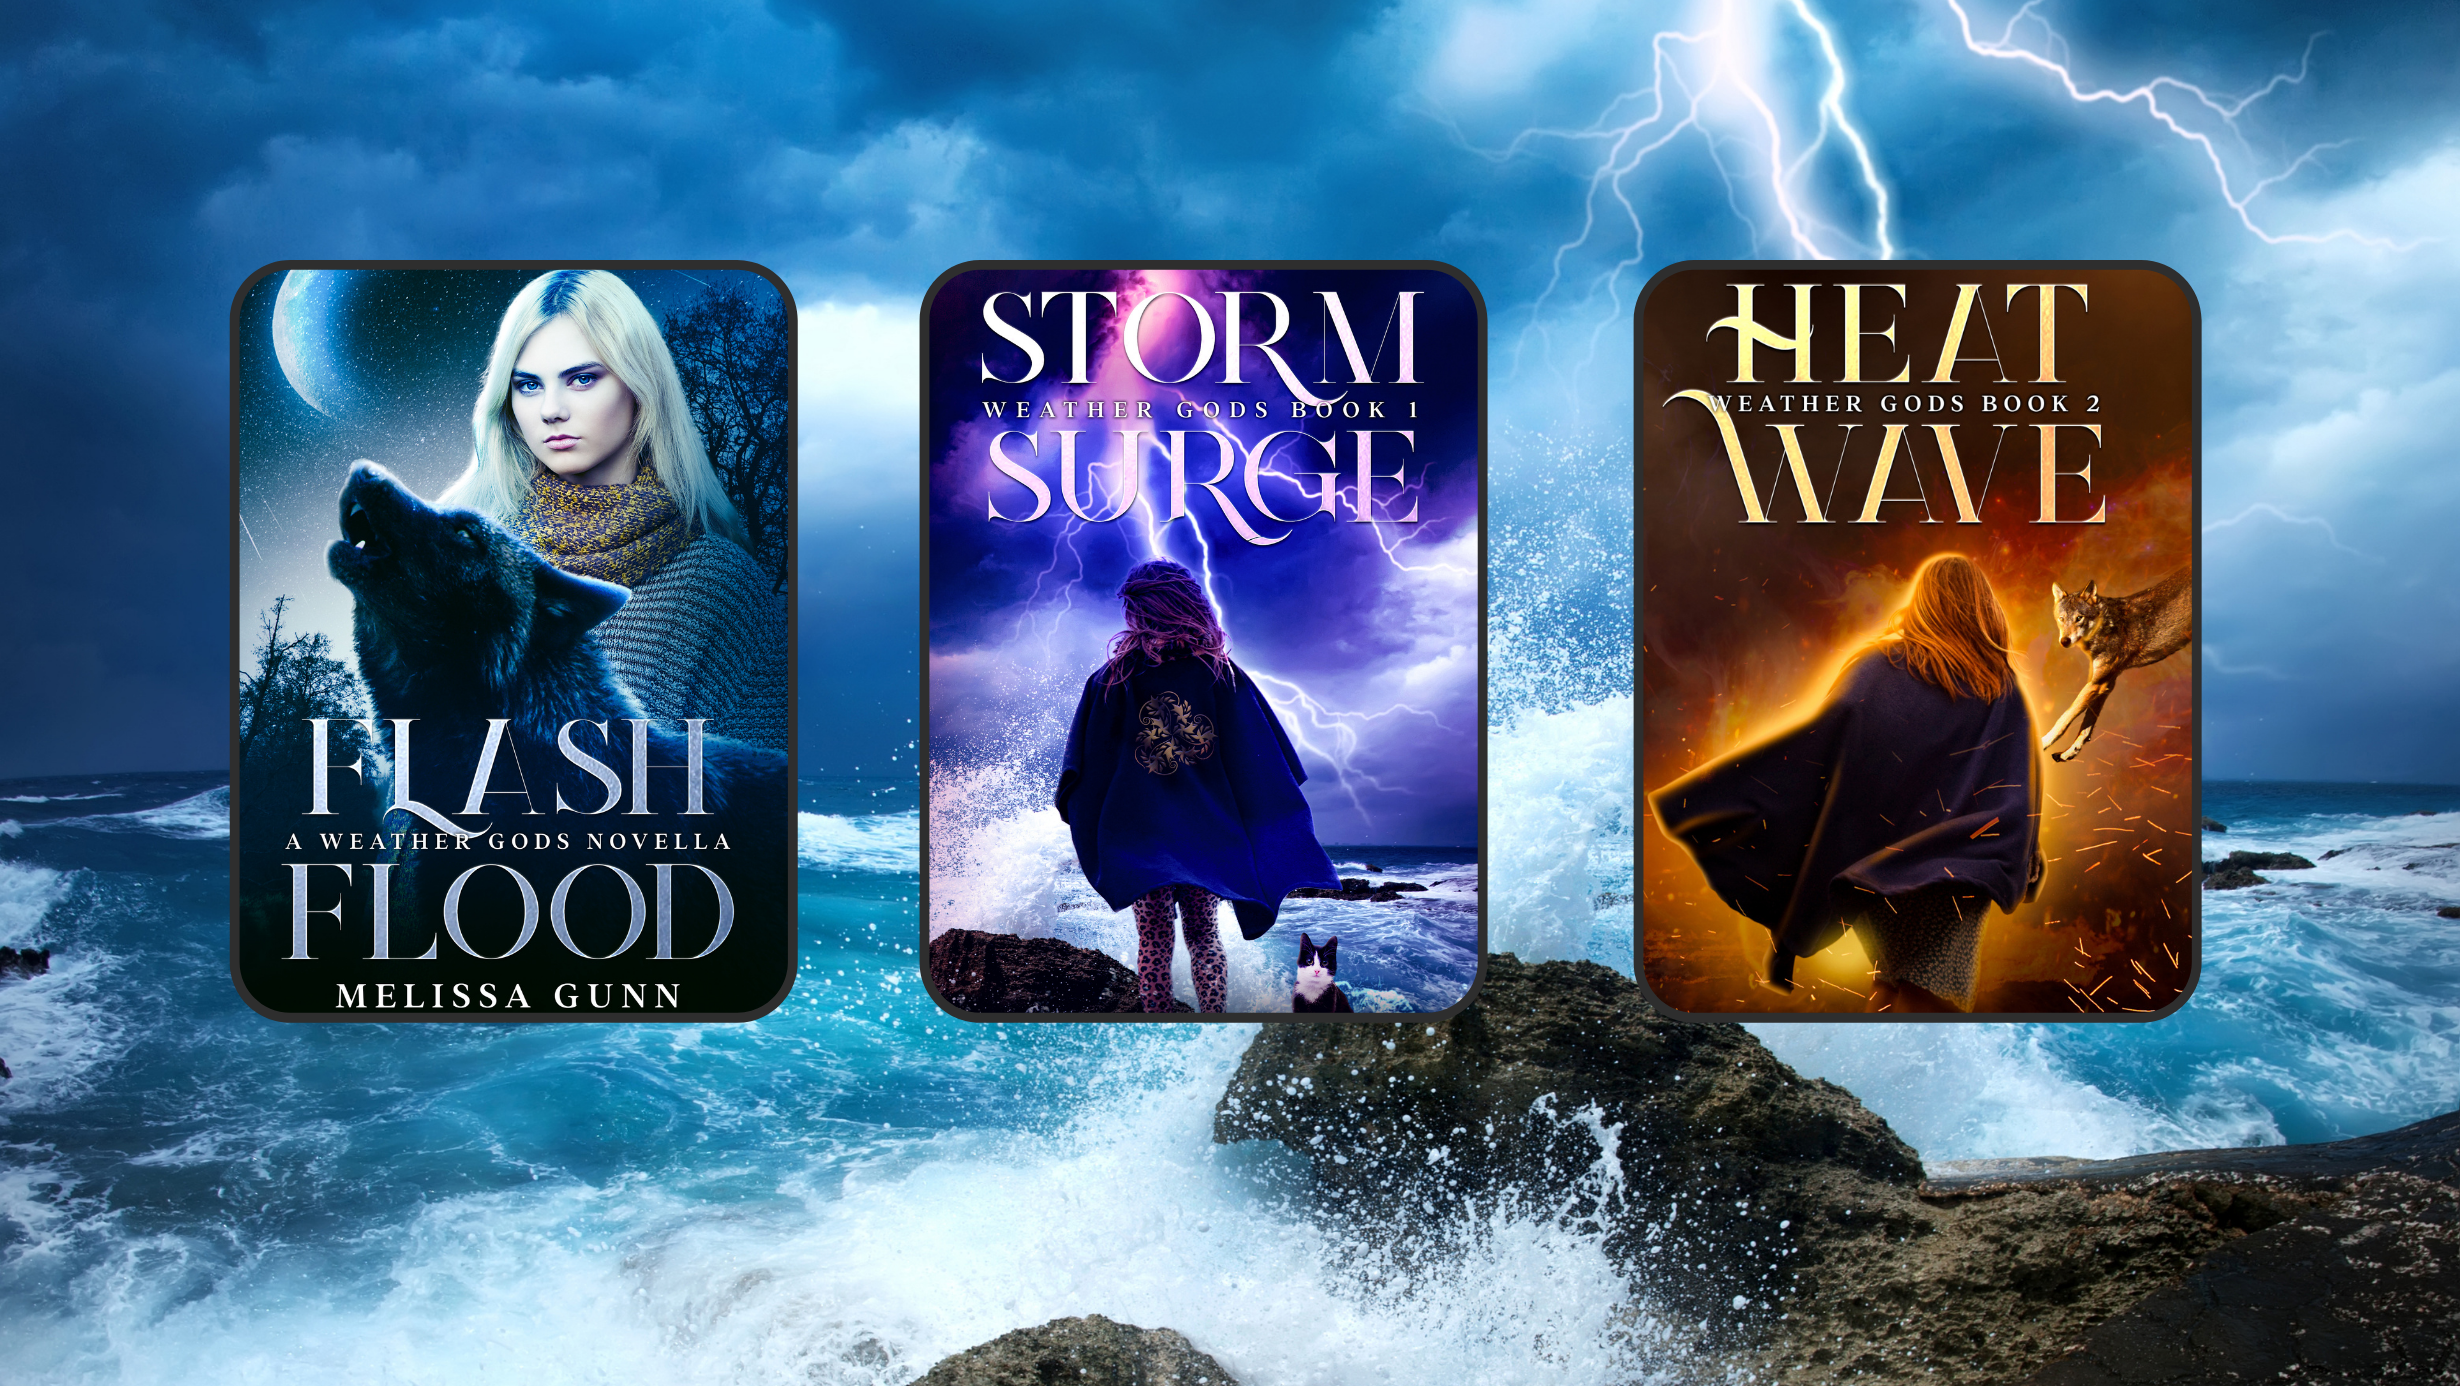 Three book covers in weather gods series